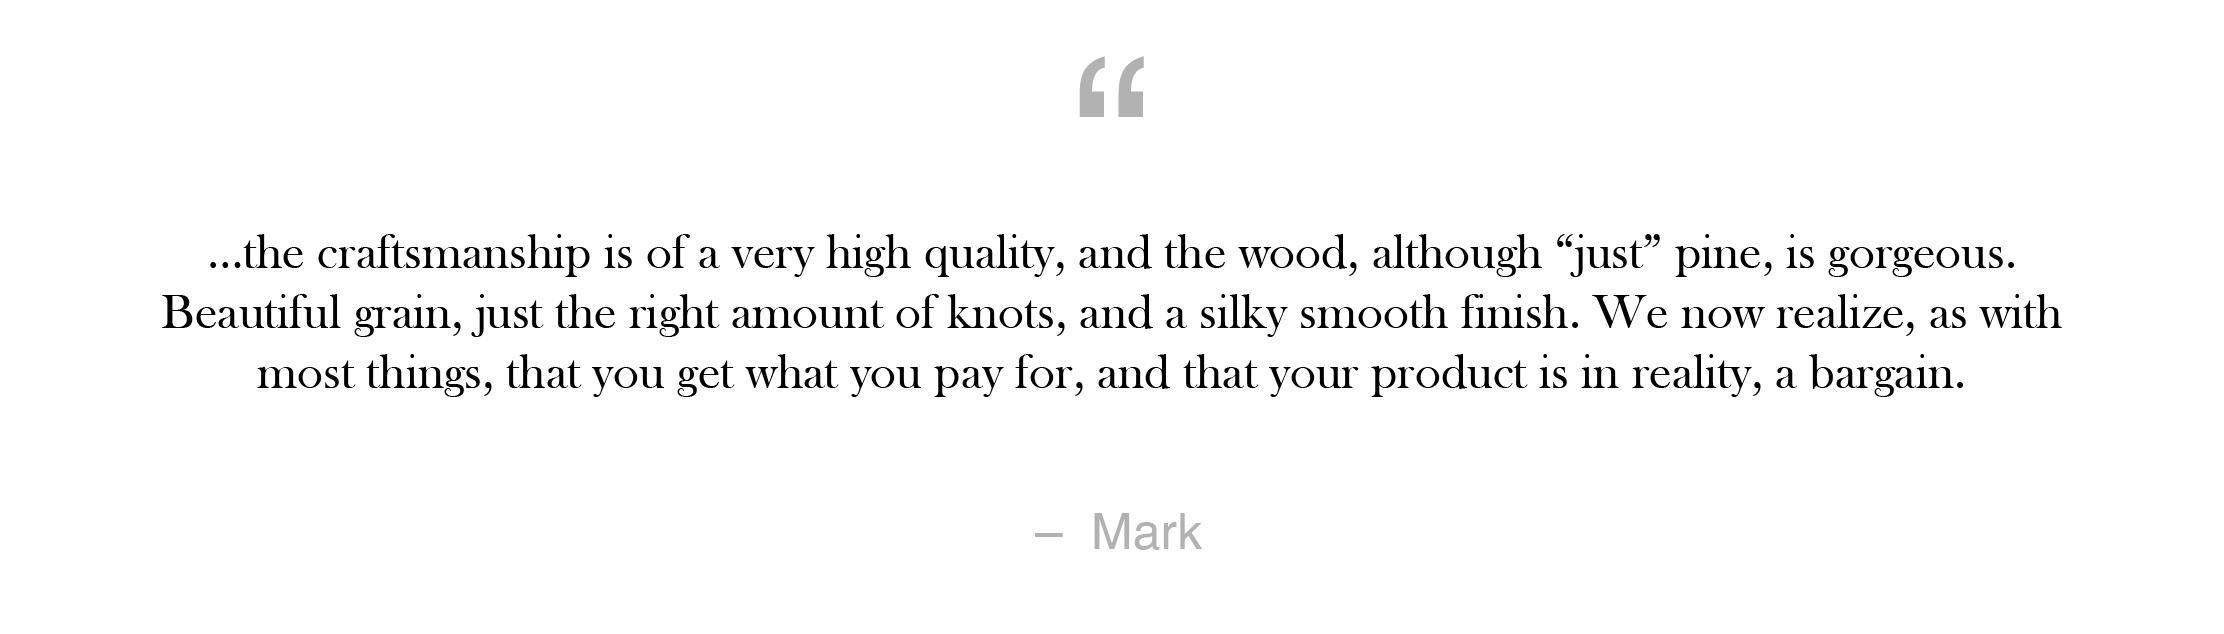 Quote#1_Mark-01.png